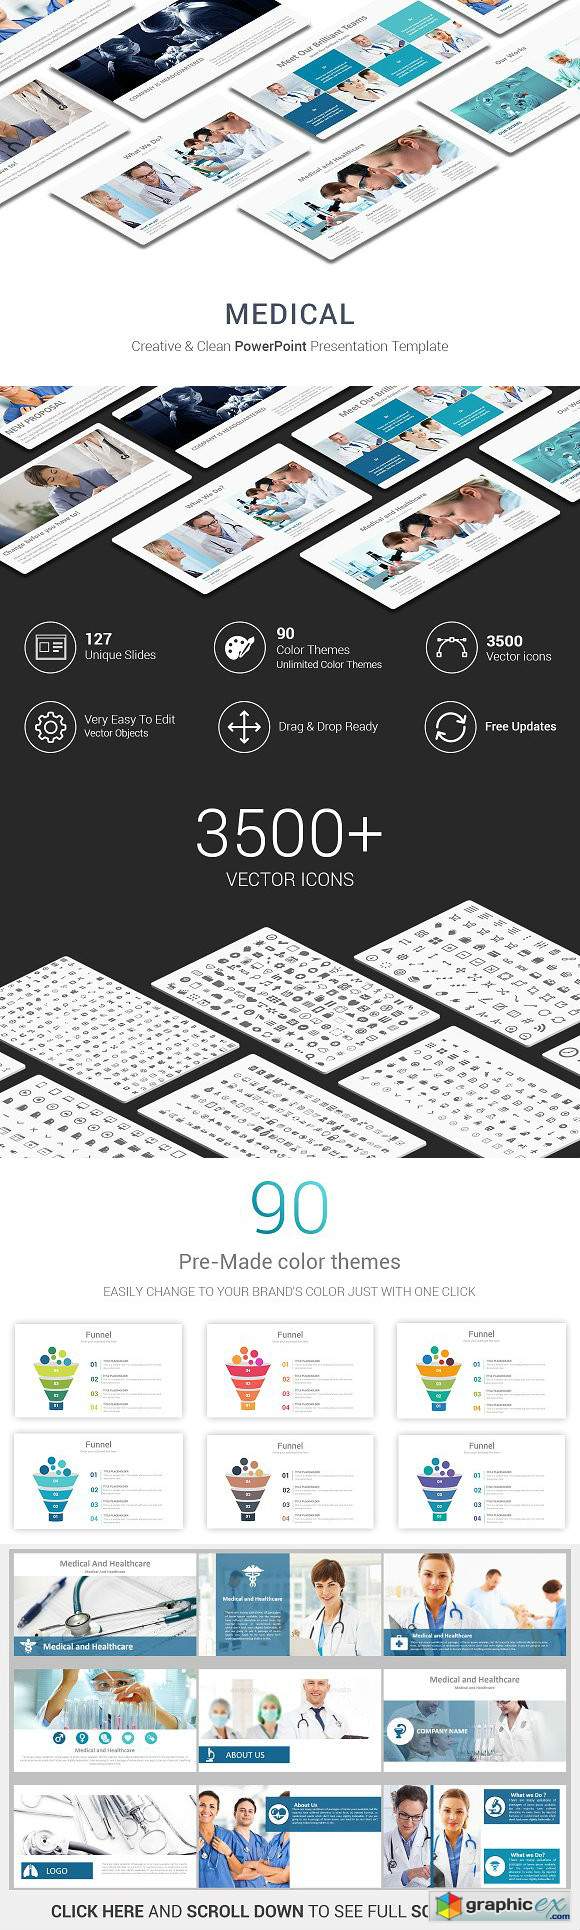 Medical PowerPoint Template 2977751